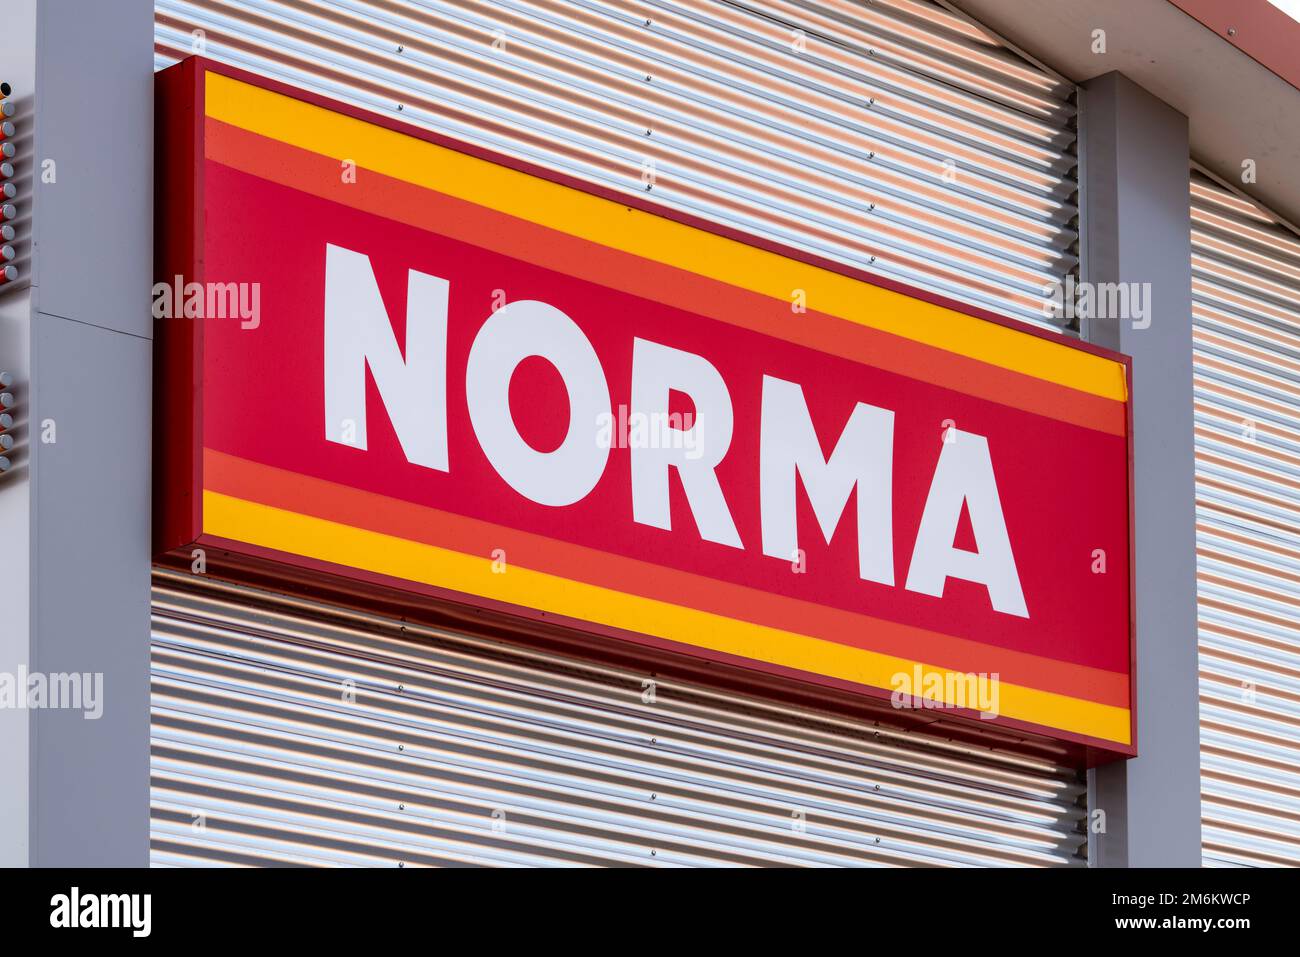 Advertising and company sign of the discounter NORMA Stock Photo